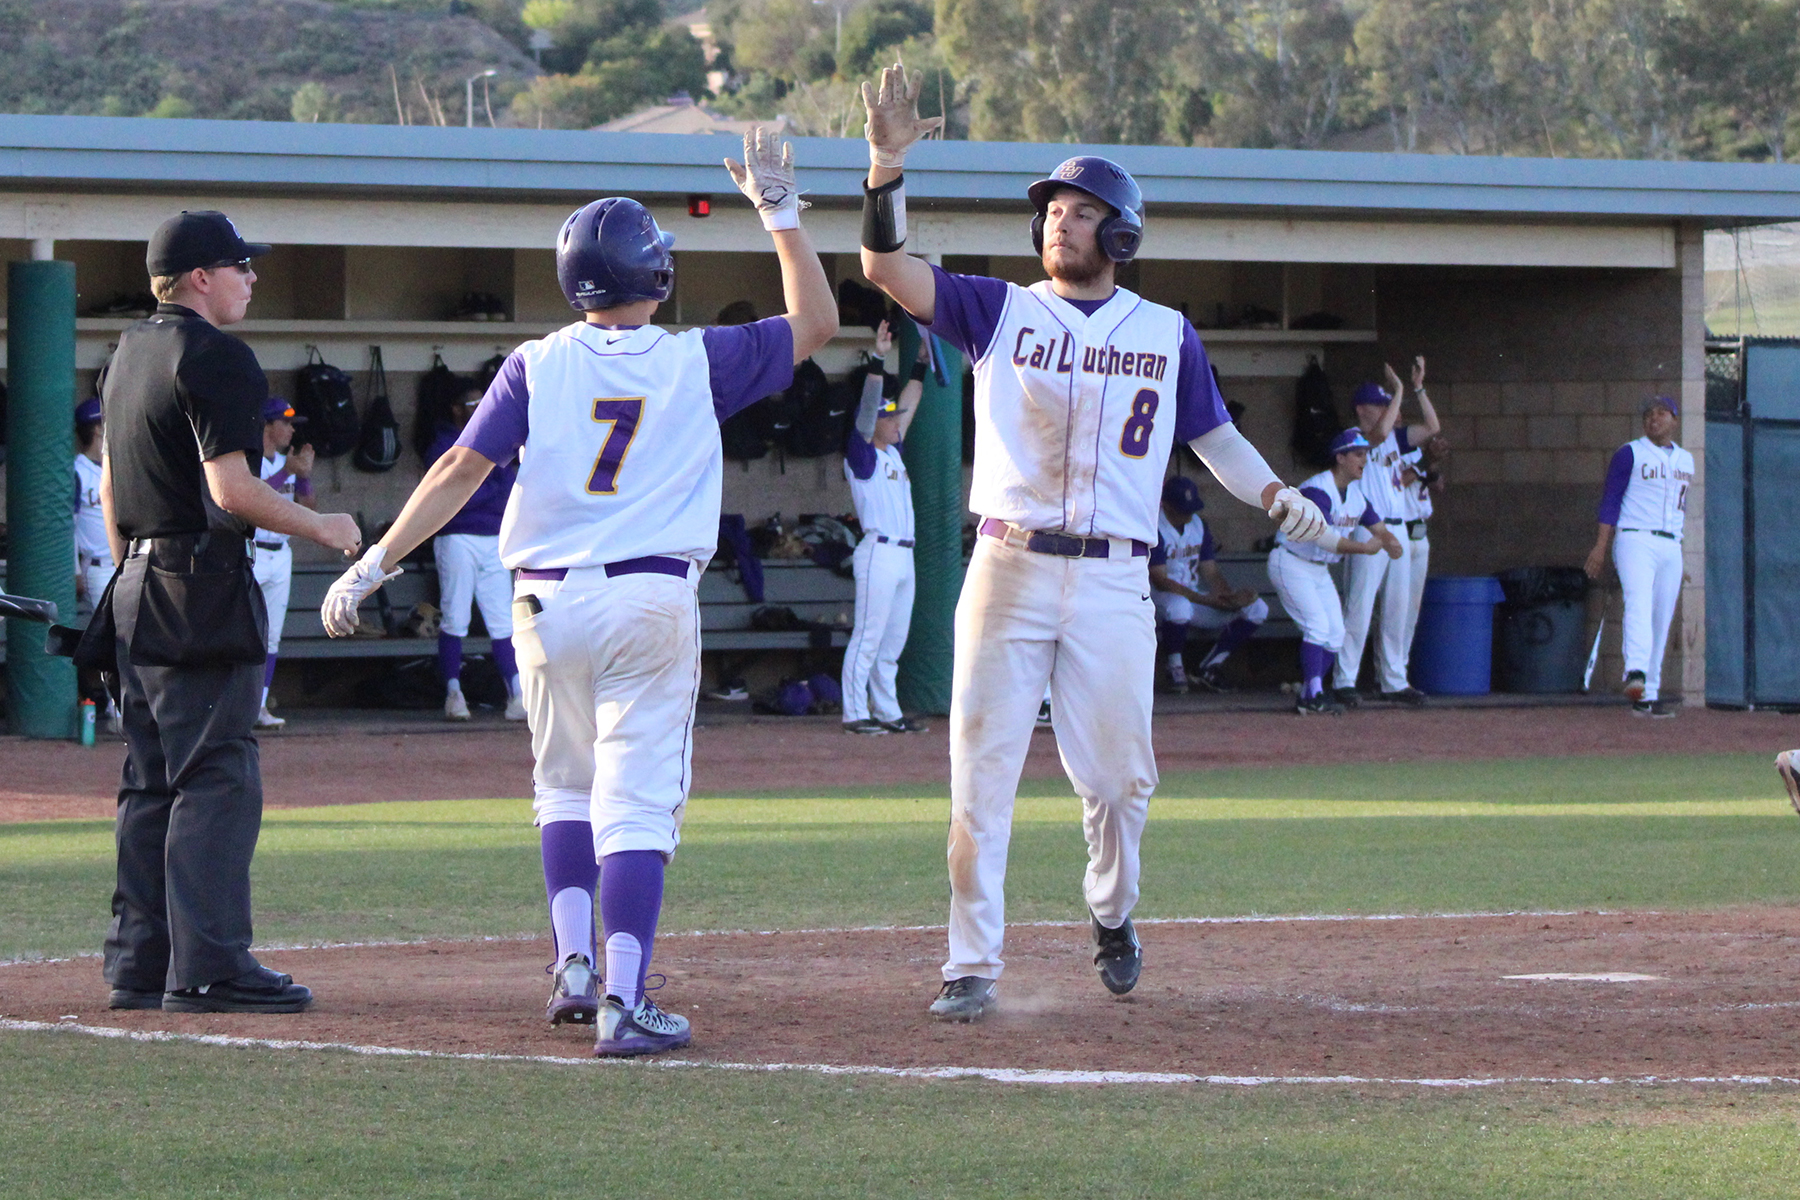 Cal Lutheran improves to 10-0 after exploding for 16 runs on 19 hits in Wednesday's win over Centenary. (Photo Credit: Mariah Zermeno)